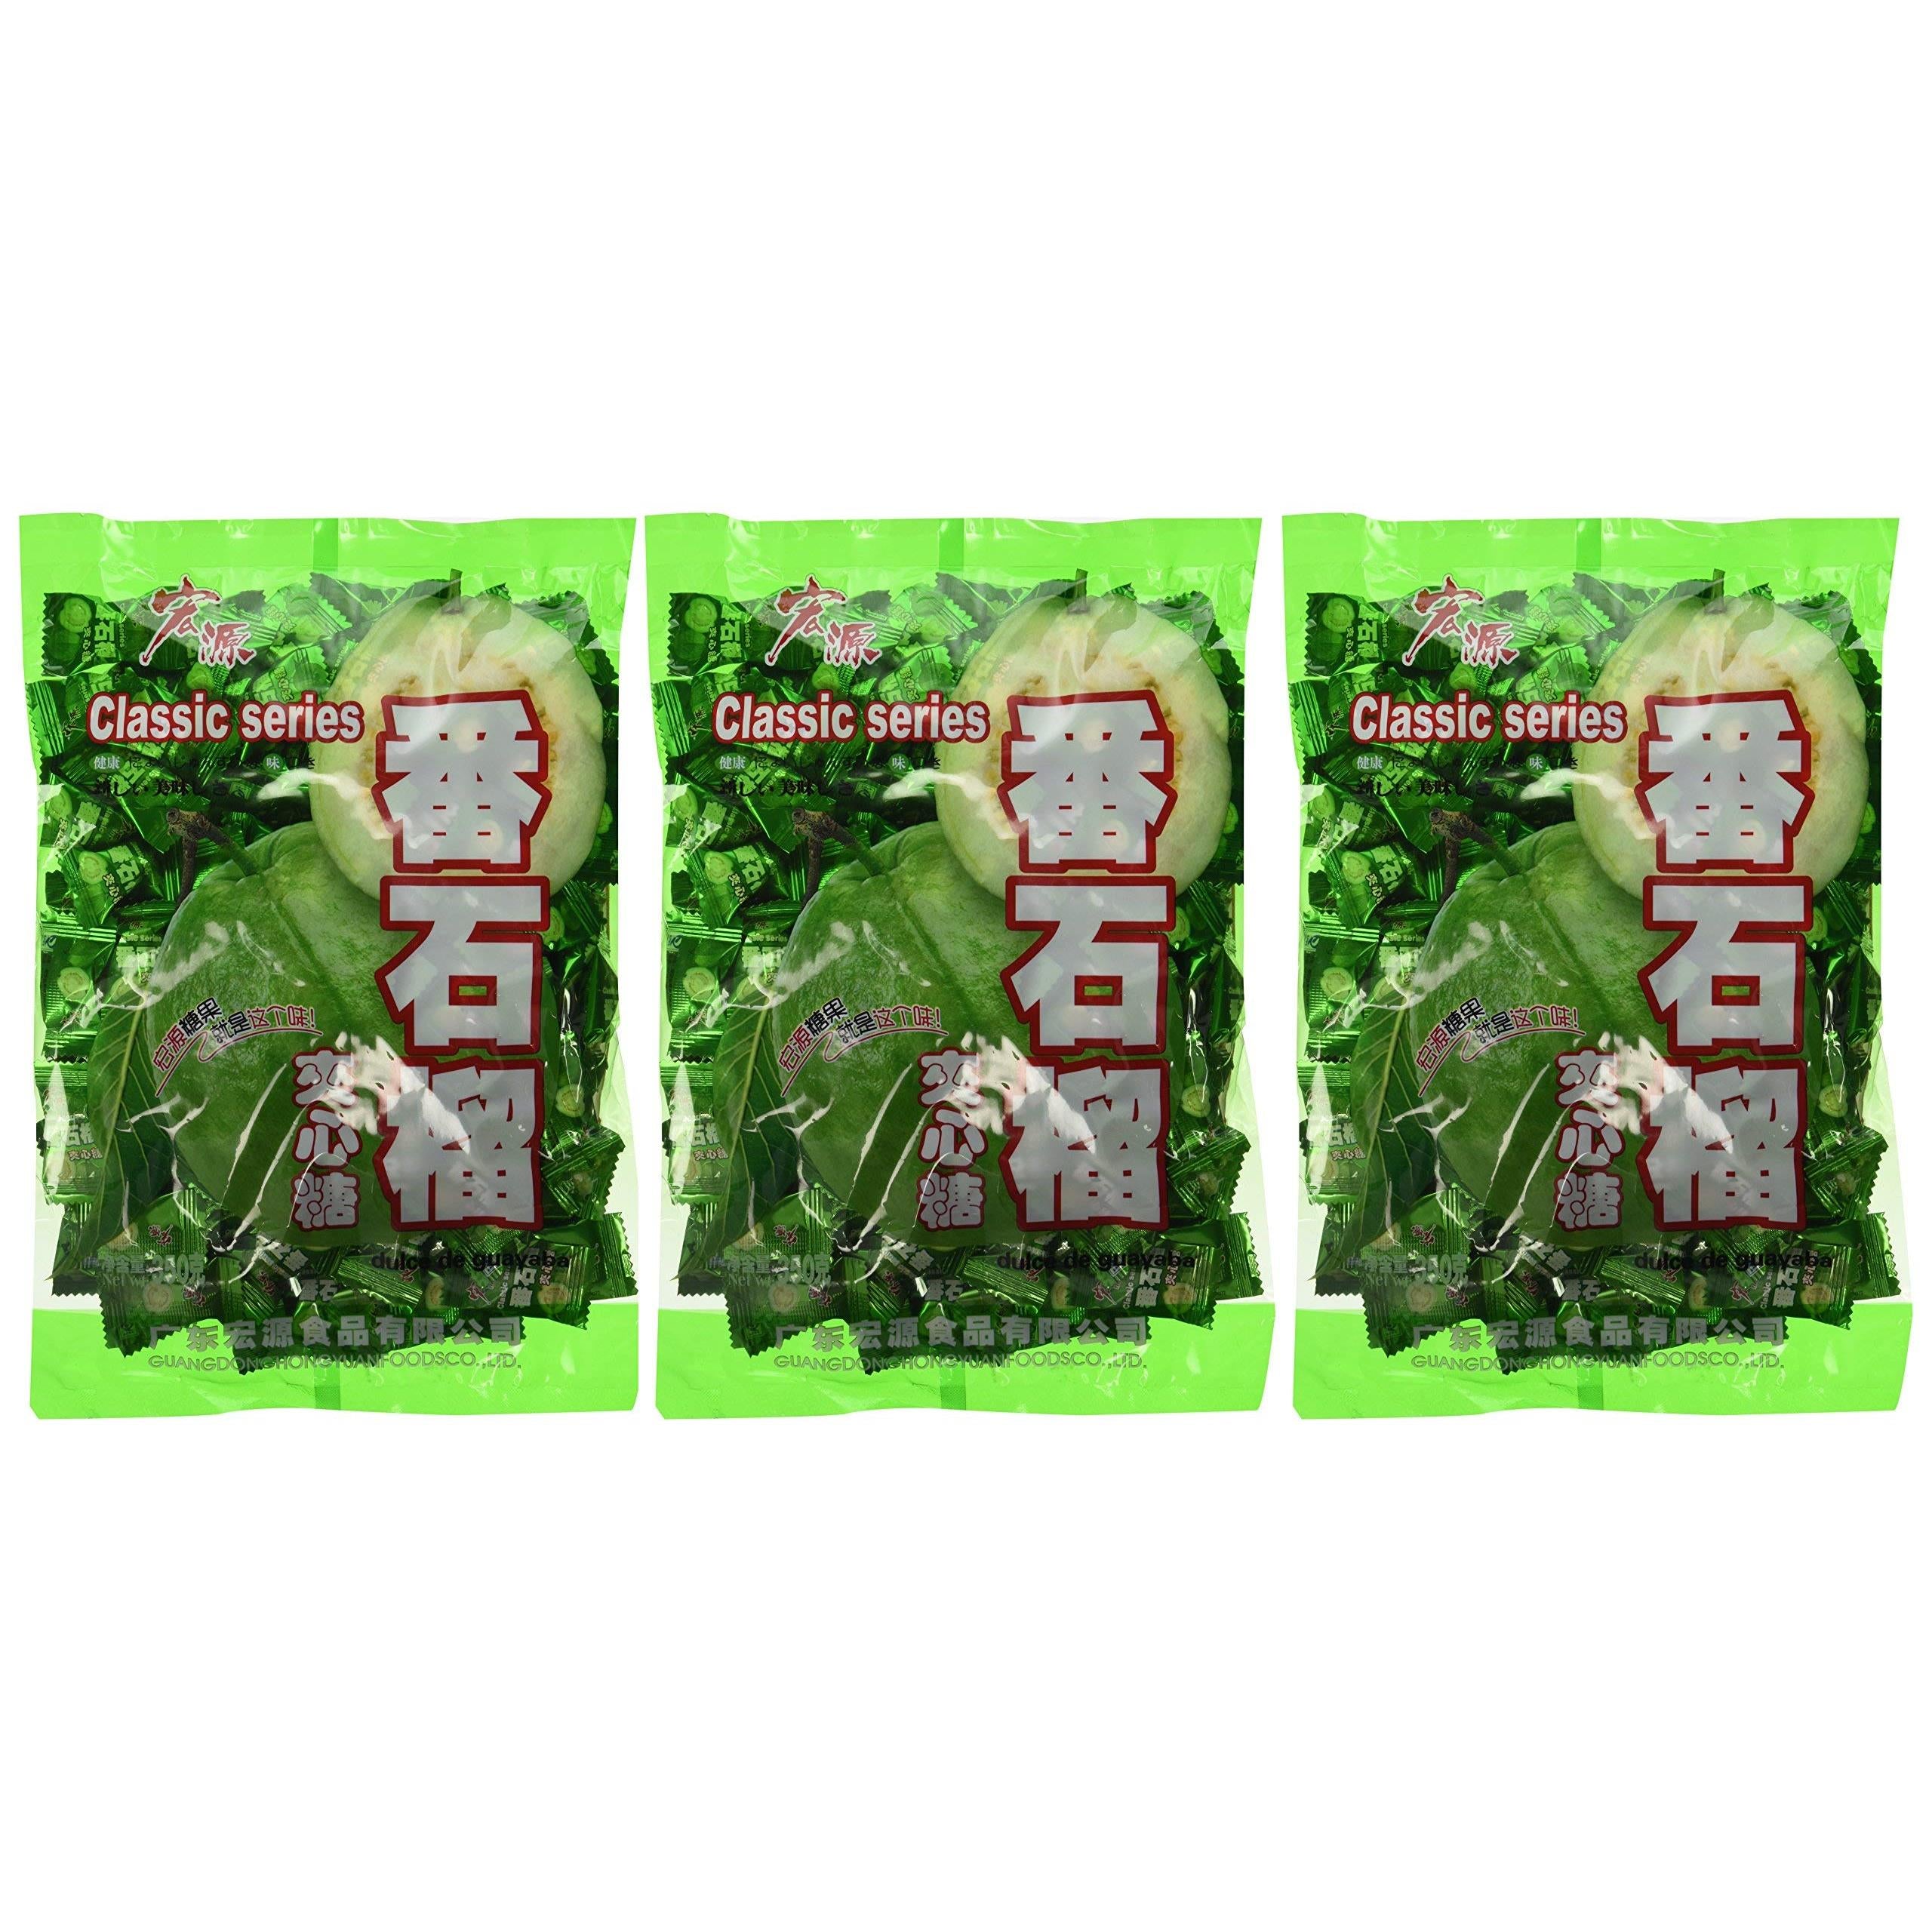 GUAVA CANDY 12.3 oz. (pack of 3) - SET OF 2